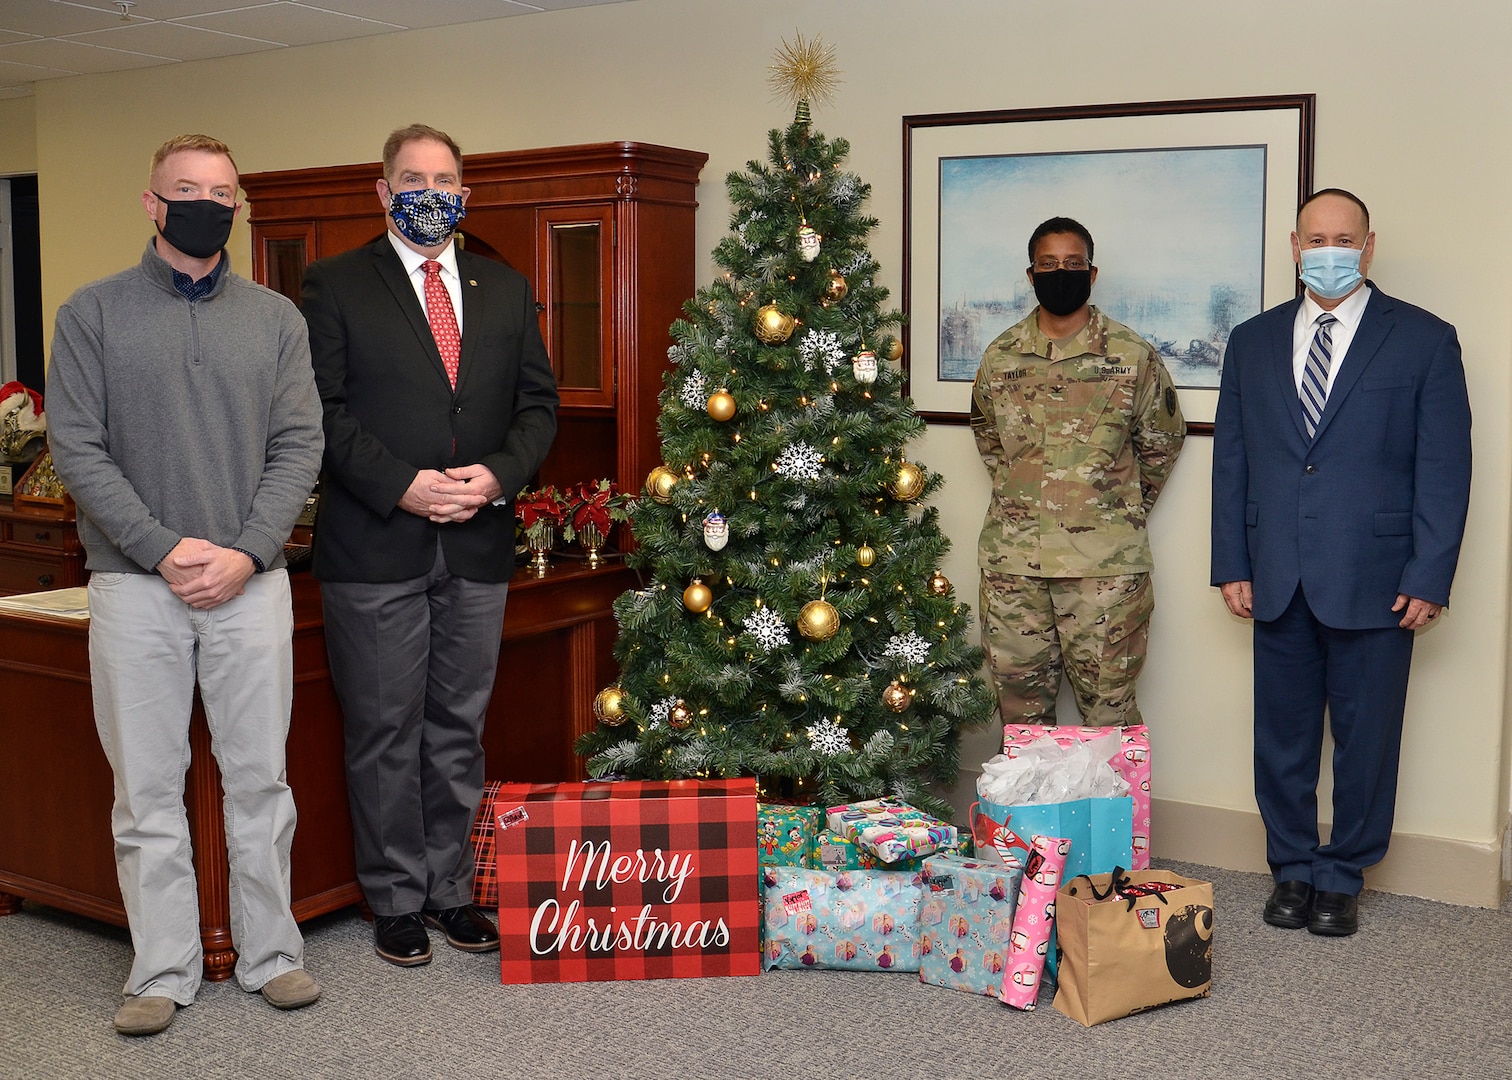 A group of four people, one of them in an Army uniform stand next to a Christmas tree in an office.